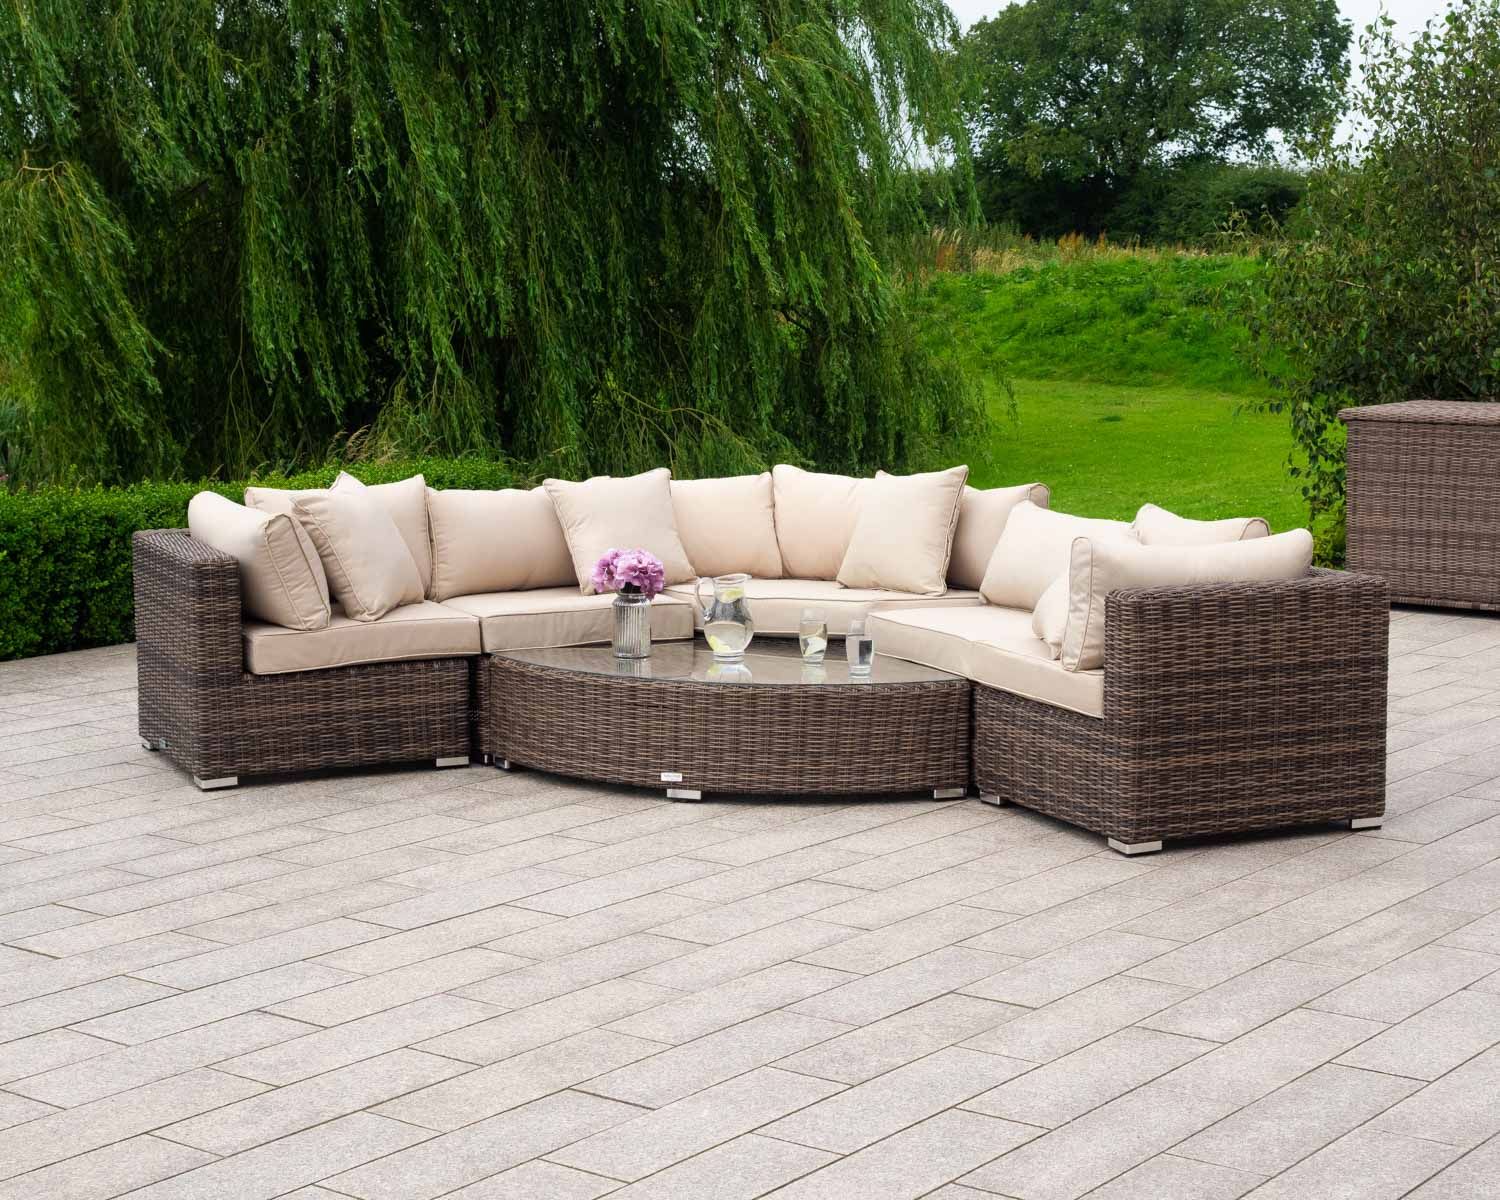 Rattan Garden Corner Sofa Set In Truffle Brown & Champagne – 6 Piece Pertaining To Brown And Yellow Sectional Corner Desks (View 6 of 15)